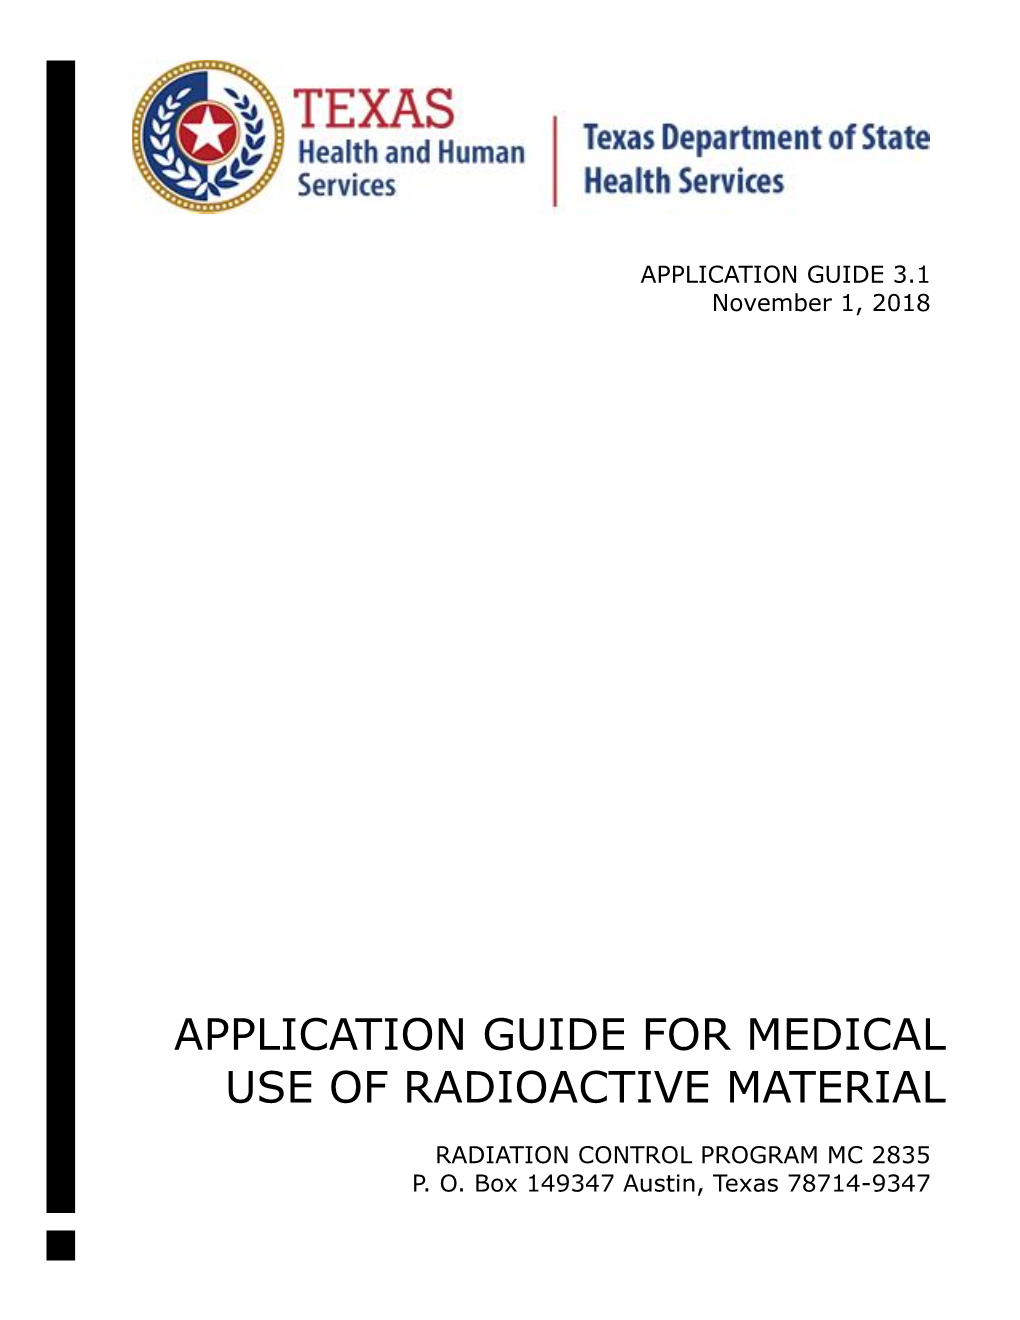 Application Guide for Medical Use of Radioactive Material